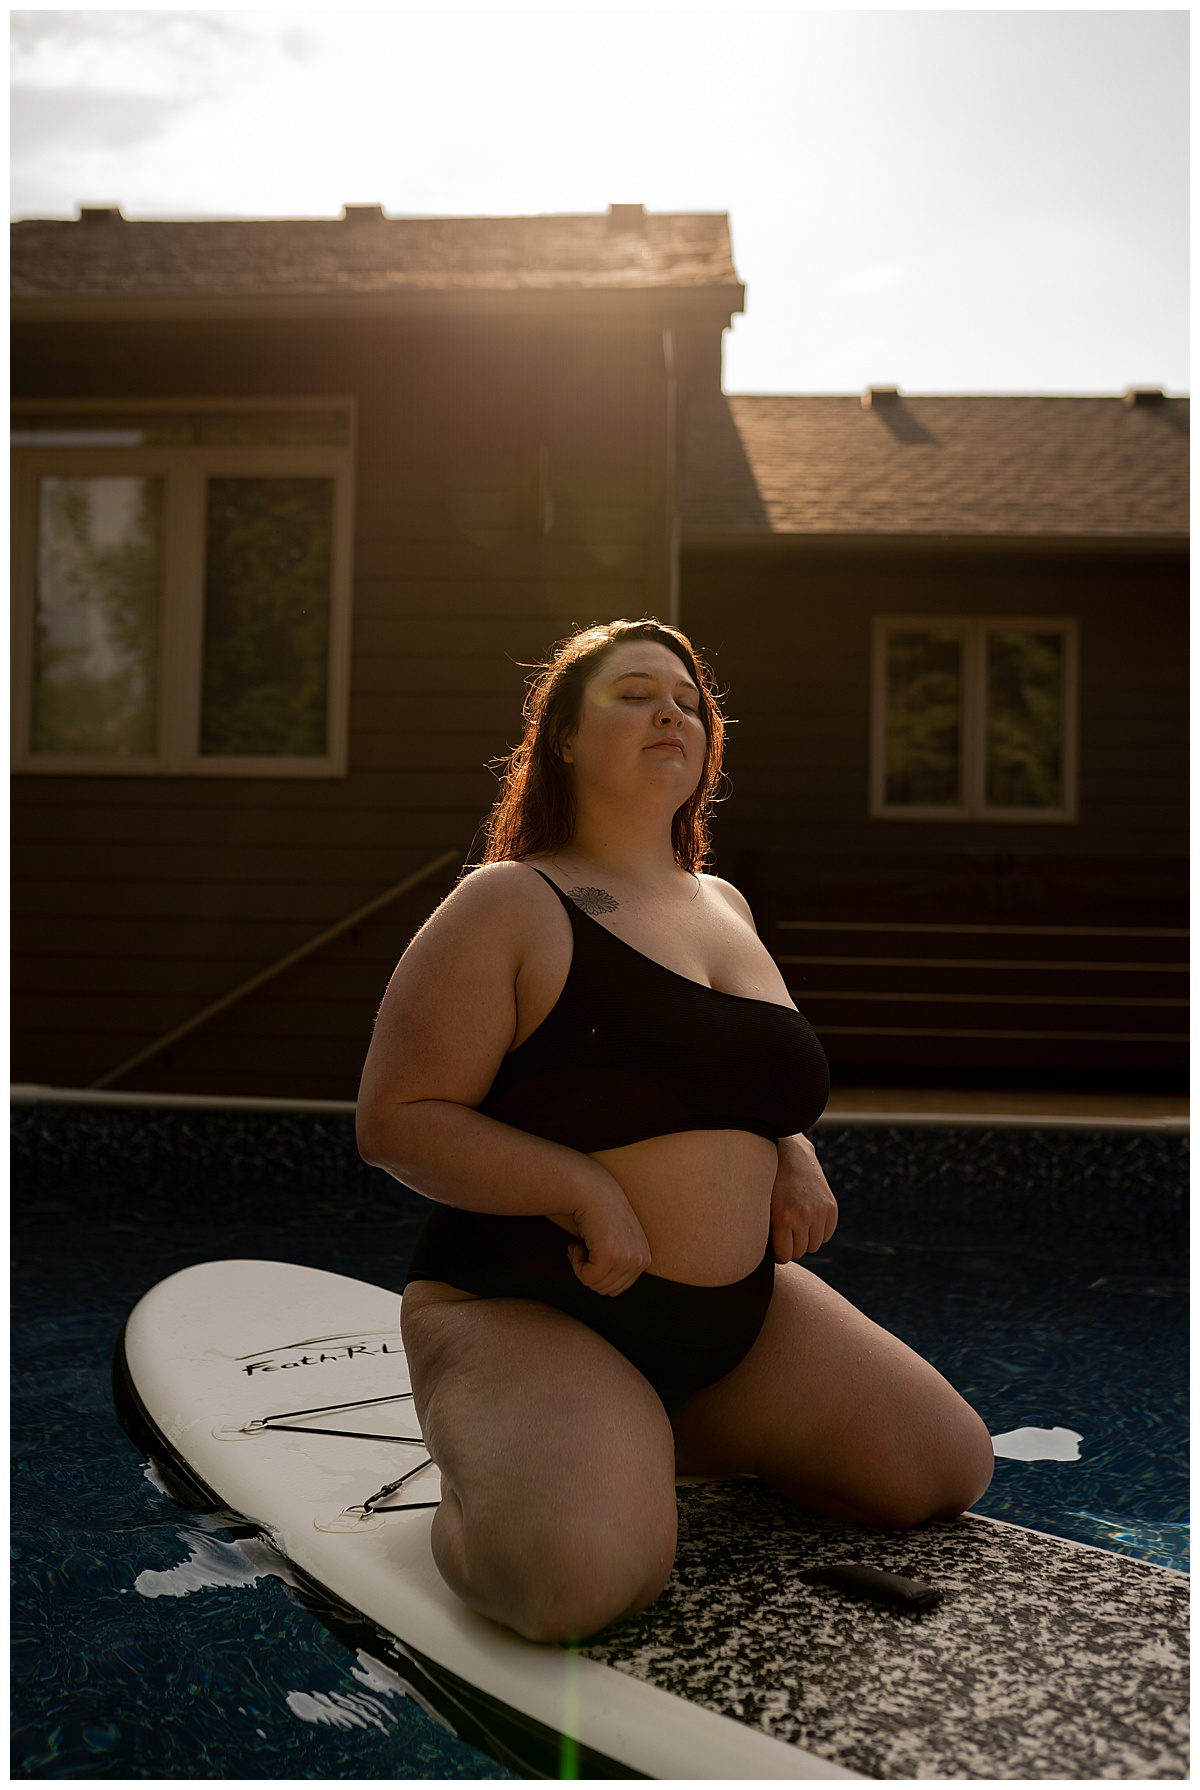 Lady kneel son paddle board wearing bathing suit for Emma Christine Photography